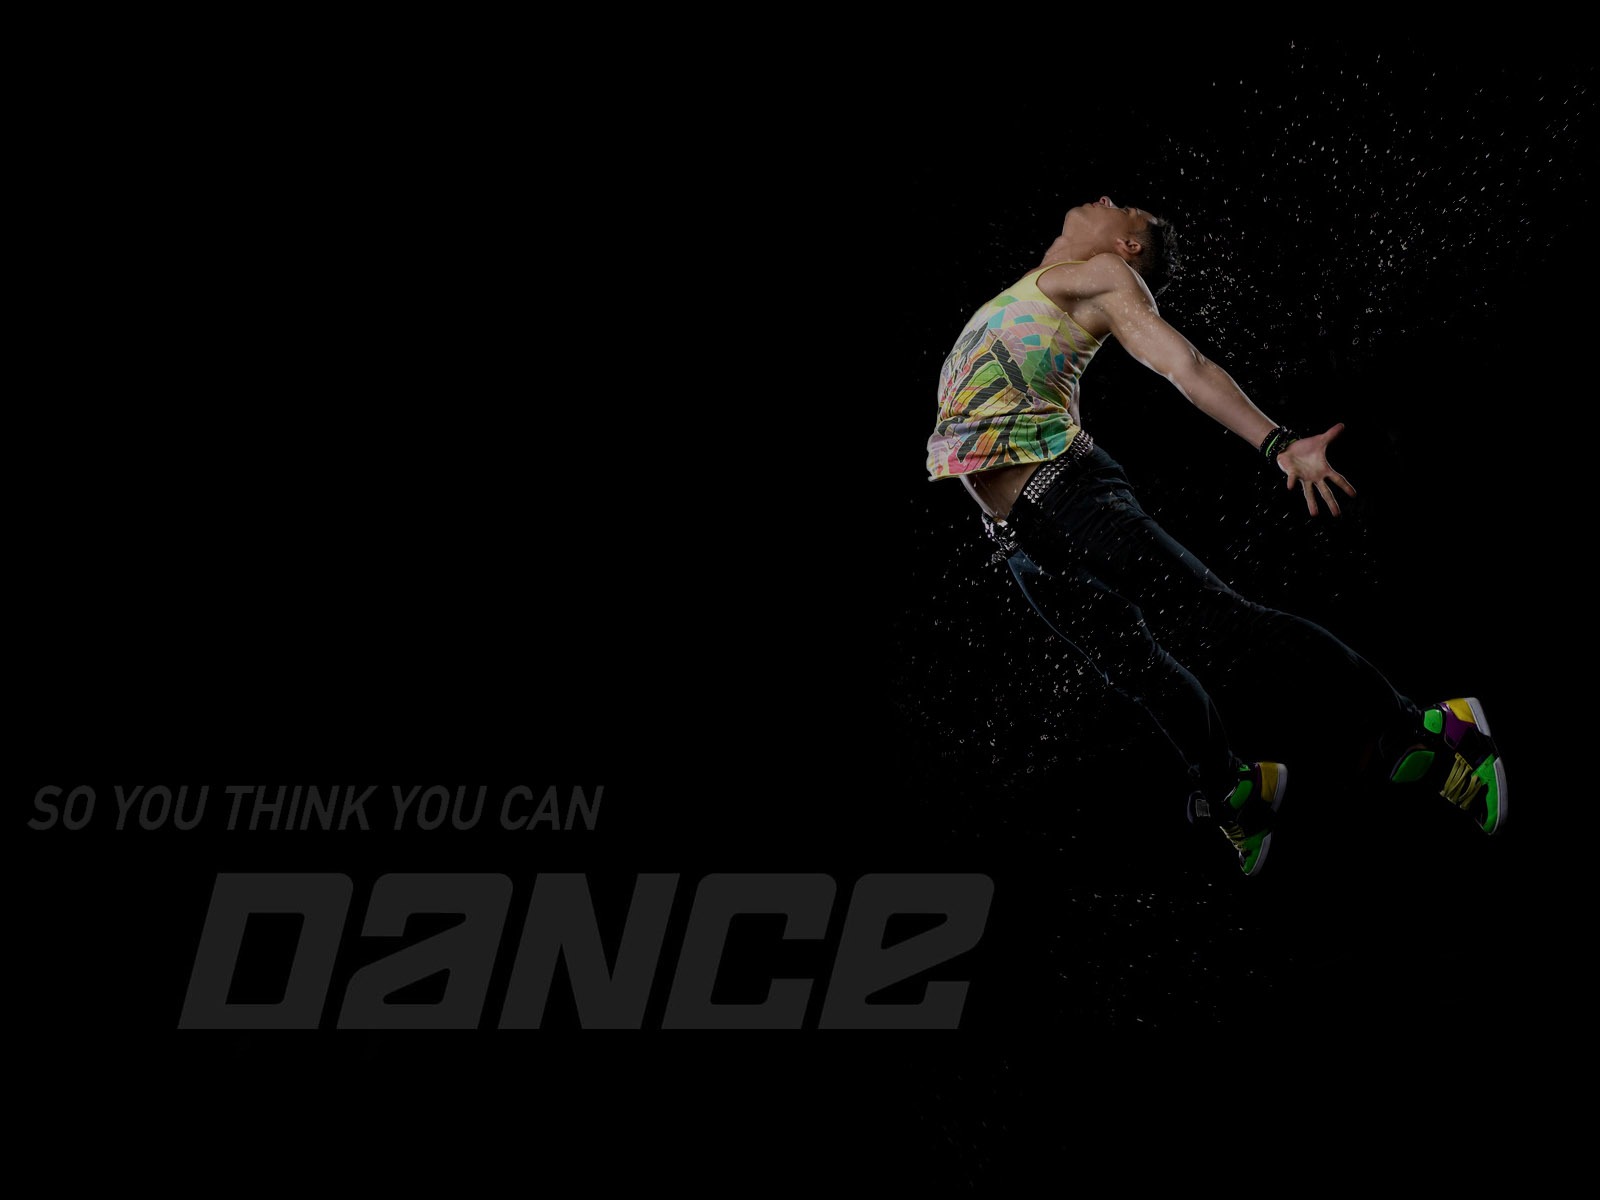 So You Think You Can Dance wallpaper (2) #6 - 1600x1200